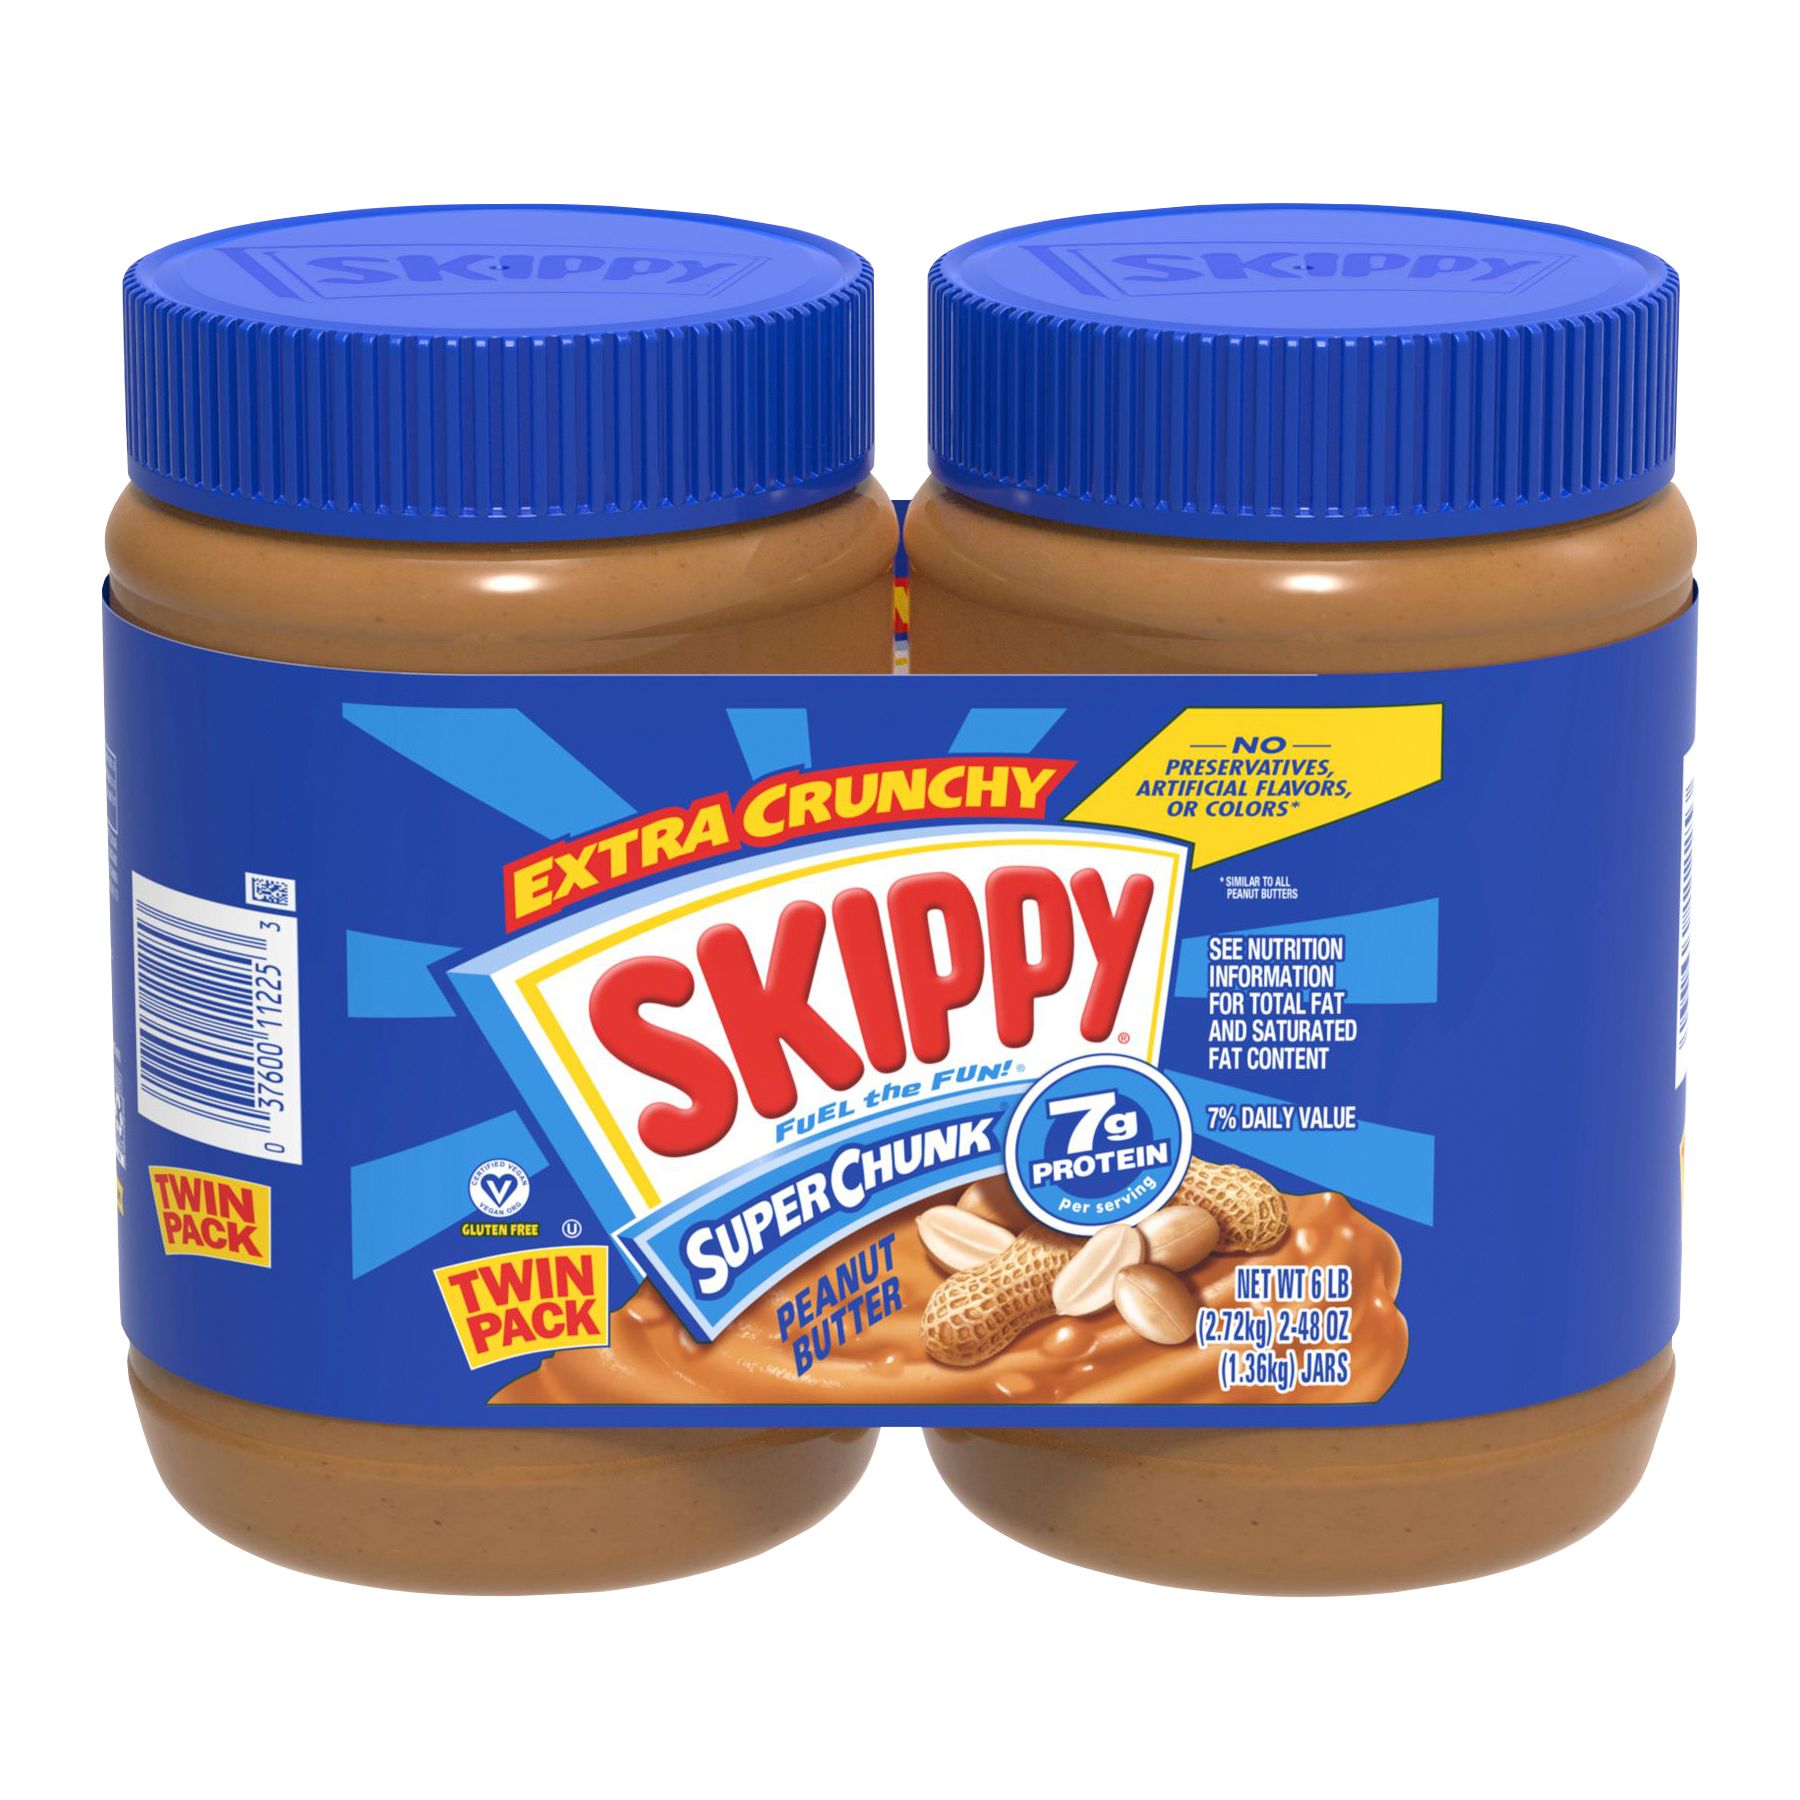 SKIPPY Natural Creamy Peanut Butter Spread Twin Pack 2-Pack, 5 LB